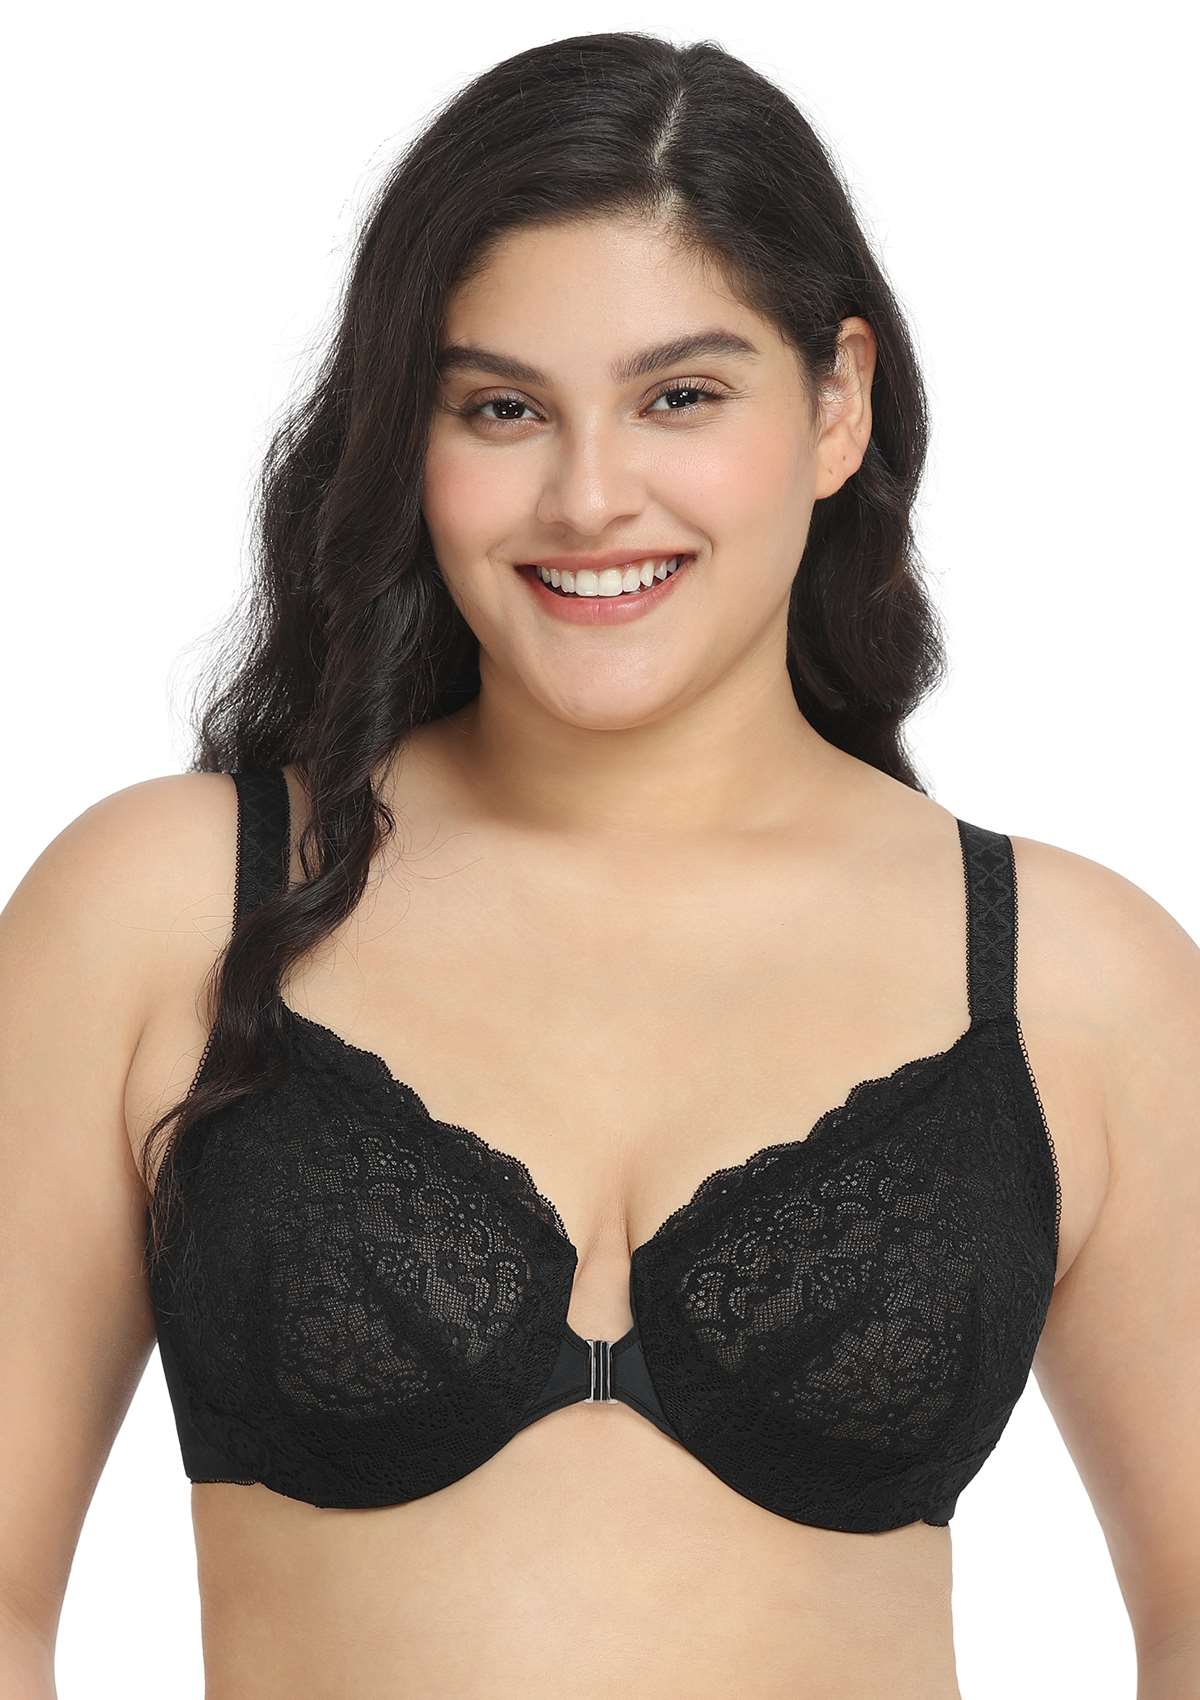 HSIA Nymphaea Front-Close Unlined Retro Floral Lace Back Smoothing Bra - Black / 40 / H